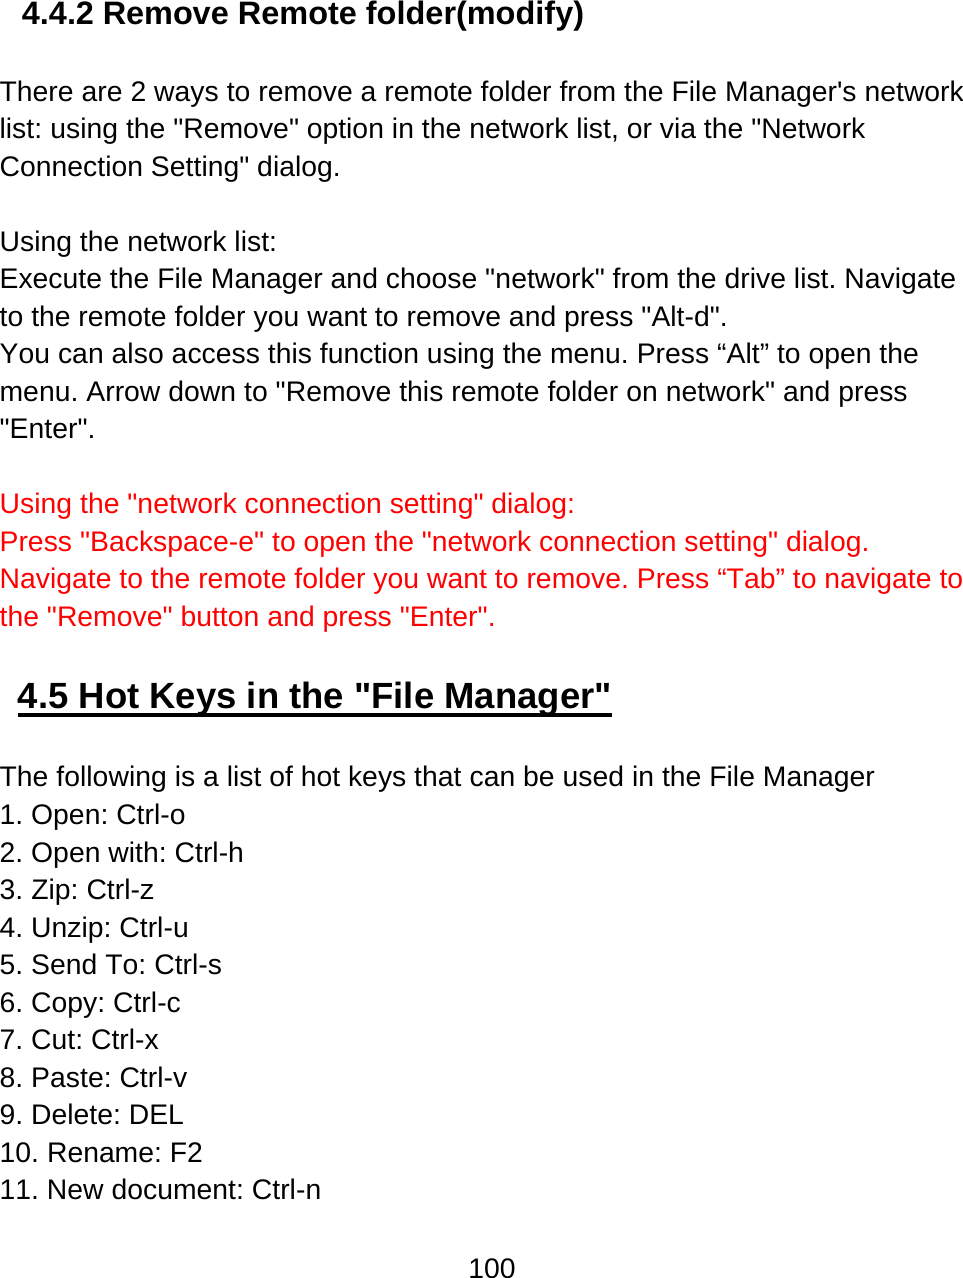 100   4.4.2 Remove Remote folder(modify)   There are 2 ways to remove a remote folder from the File Manager&apos;s network list: using the &quot;Remove&quot; option in the network list, or via the &quot;Network Connection Setting&quot; dialog.    Using the network list: Execute the File Manager and choose &quot;network&quot; from the drive list. Navigate to the remote folder you want to remove and press &quot;Alt-d&quot;.  You can also access this function using the menu. Press “Alt” to open the menu. Arrow down to &quot;Remove this remote folder on network&quot; and press &quot;Enter&quot;.   Using the &quot;network connection setting&quot; dialog: Press &quot;Backspace-e&quot; to open the &quot;network connection setting&quot; dialog. Navigate to the remote folder you want to remove. Press “Tab” to navigate to the &quot;Remove&quot; button and press &quot;Enter&quot;.   4.5 Hot Keys in the &quot;File Manager&quot;  The following is a list of hot keys that can be used in the File Manager 1. Open: Ctrl-o  2. Open with: Ctrl-h  3. Zip: Ctrl-z 4. Unzip: Ctrl-u 5. Send To: Ctrl-s 6. Copy: Ctrl-c 7. Cut: Ctrl-x 8. Paste: Ctrl-v  9. Delete: DEL 10. Rename: F2 11. New document: Ctrl-n 